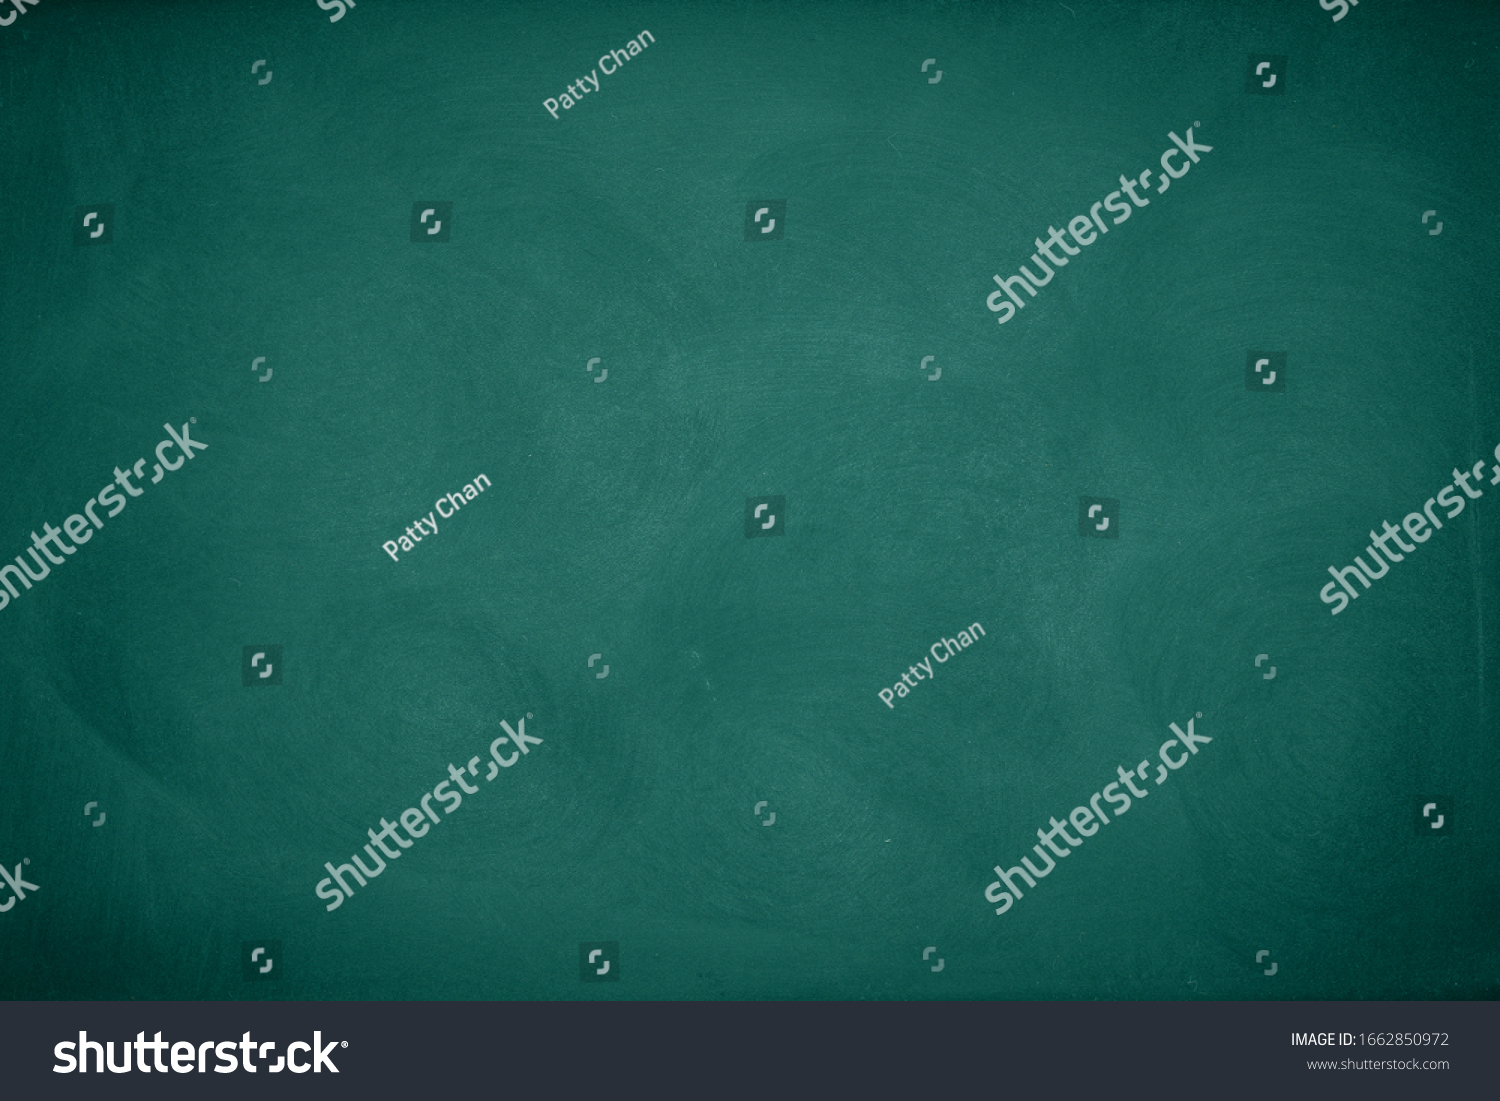 Green Chalkboard. Chalk texture school board display for background. chalk traces erased with copy space for add text or graphic design. Backdrop of Education concepts  #1662850972